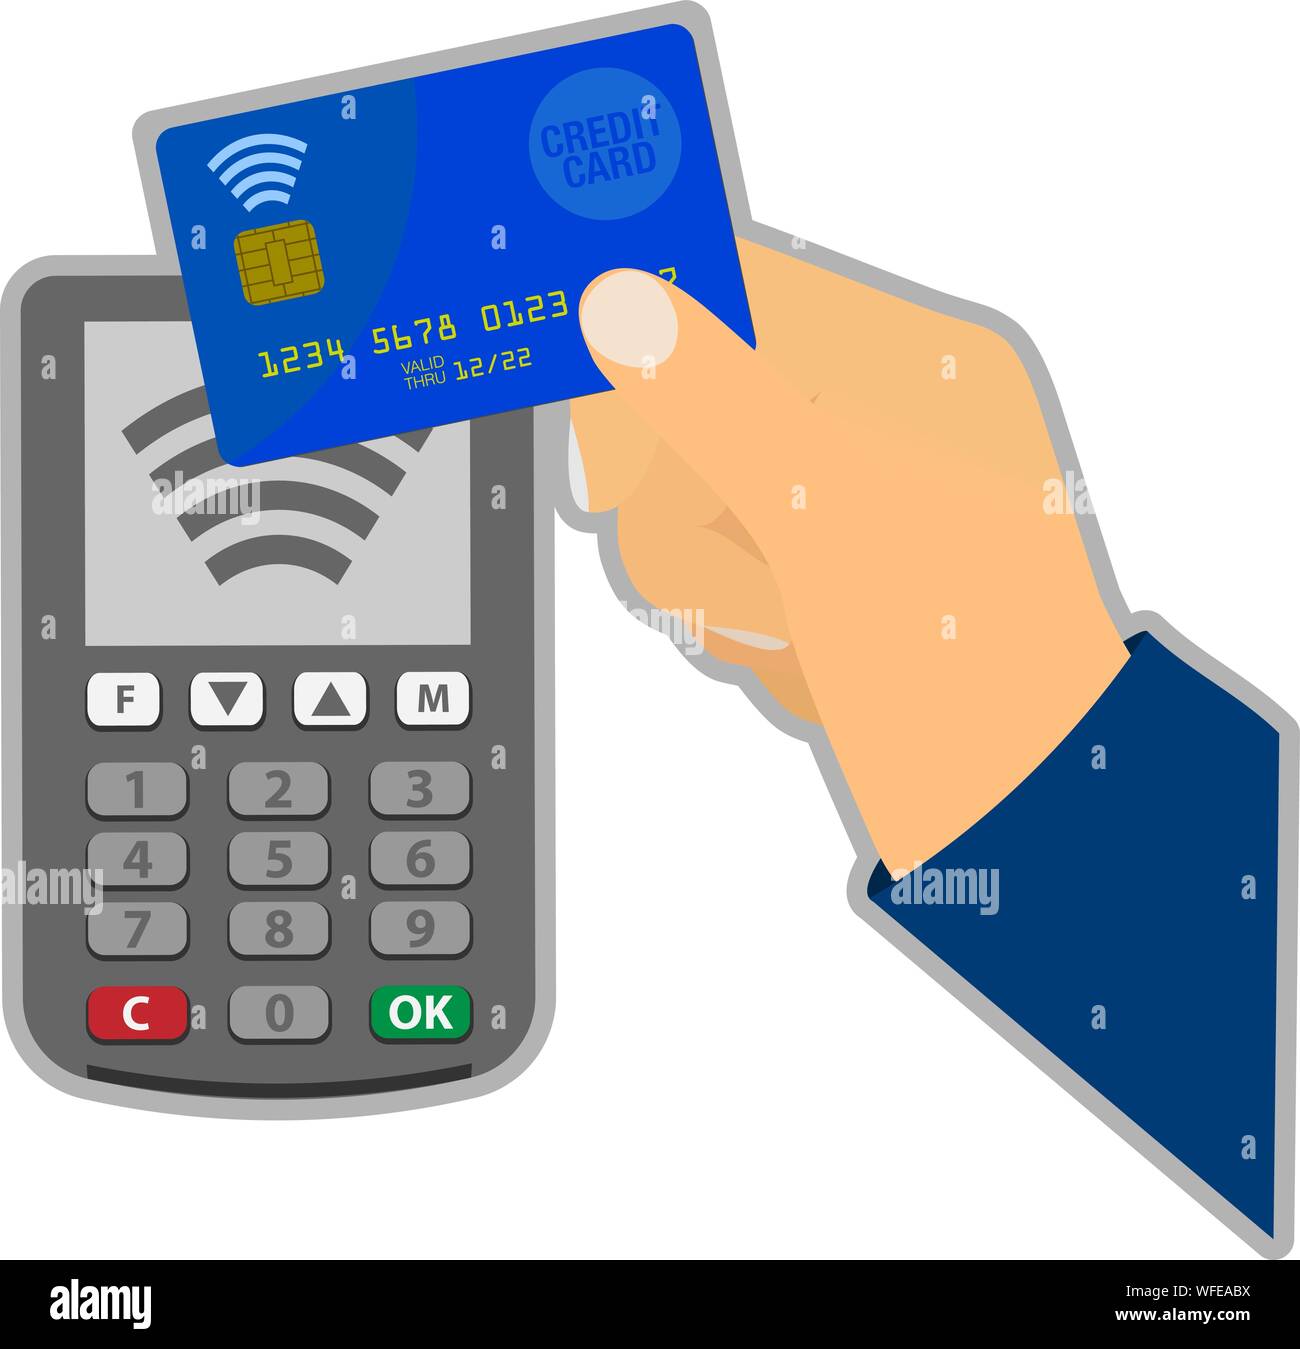 contactless credit card payment concept with hand holding card against POS payment terminal vector illustration Stock Vector